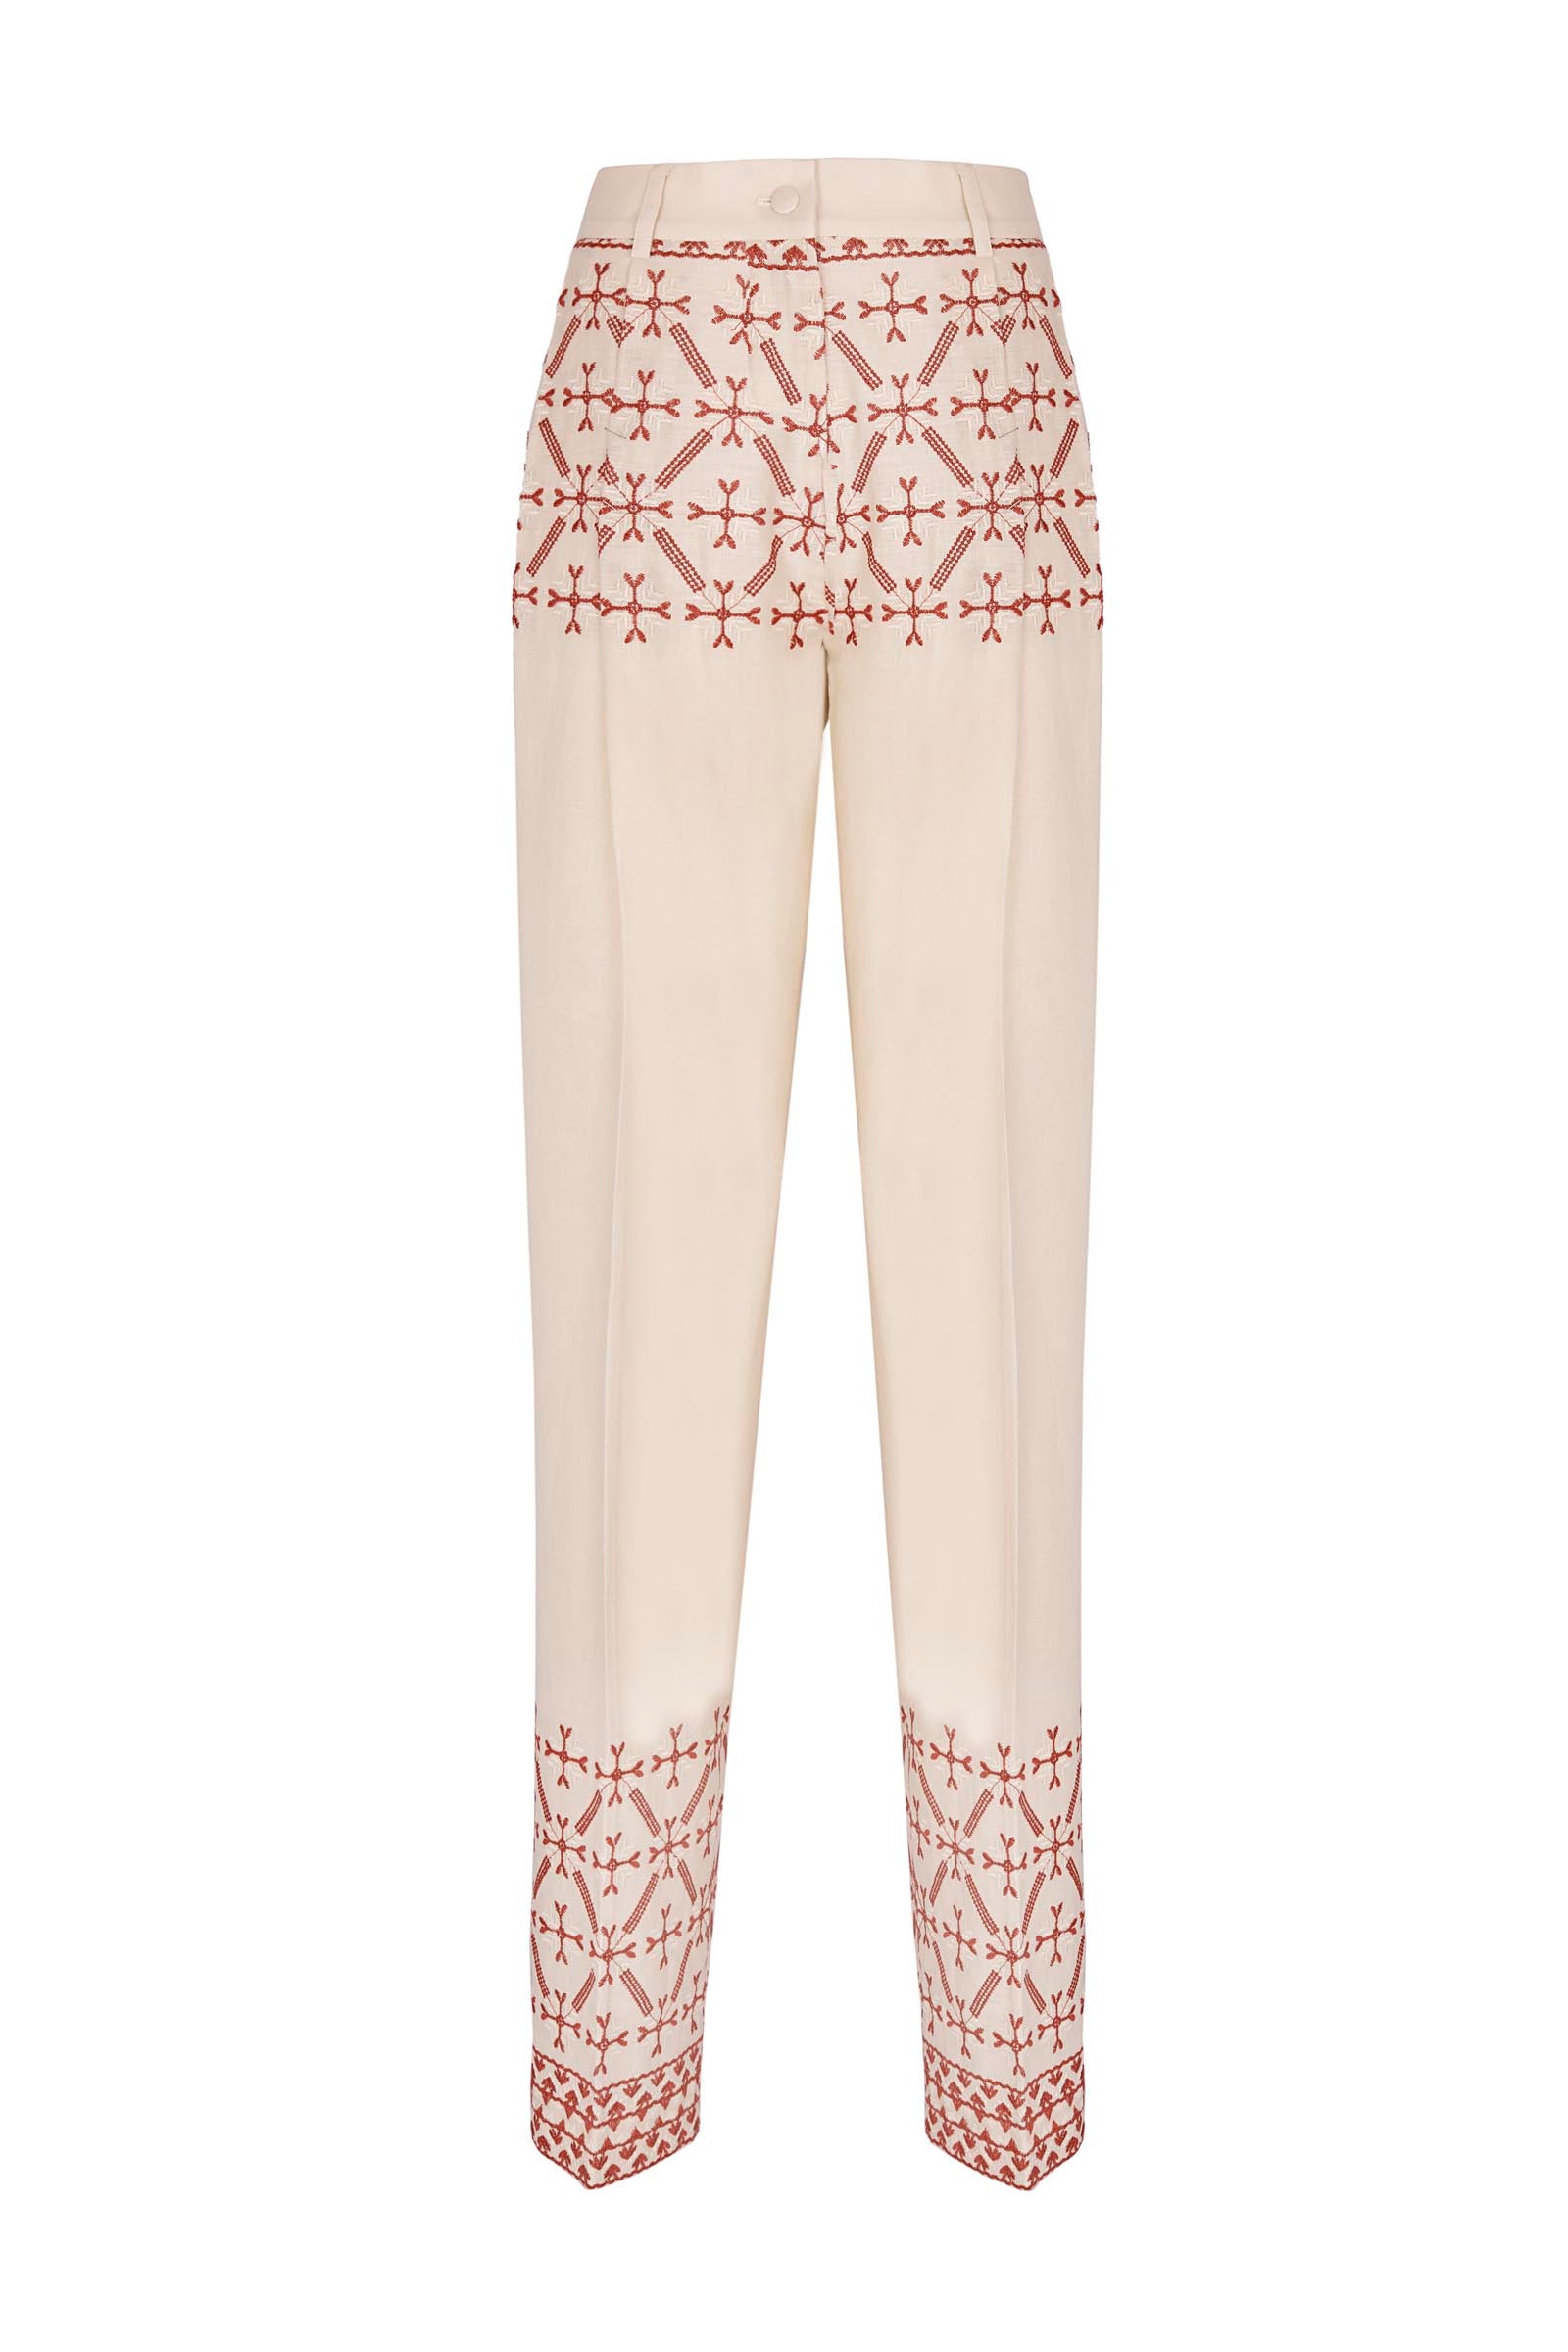 The Cream & Red Embroidered Linen Diane Pants